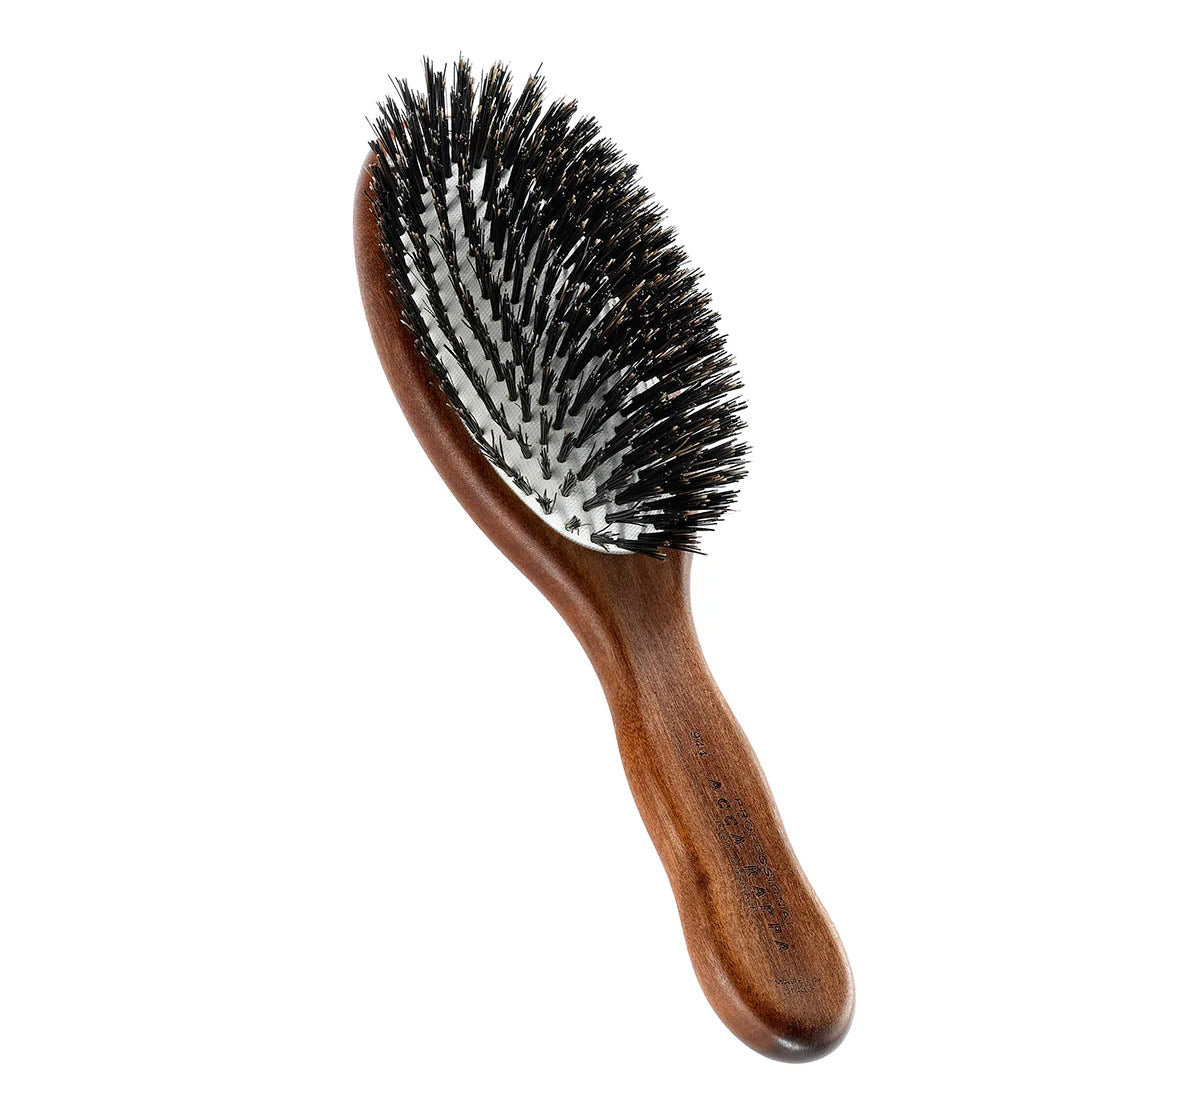 The Pneumatic Pure Bristle Brush by ACCA KAPPA